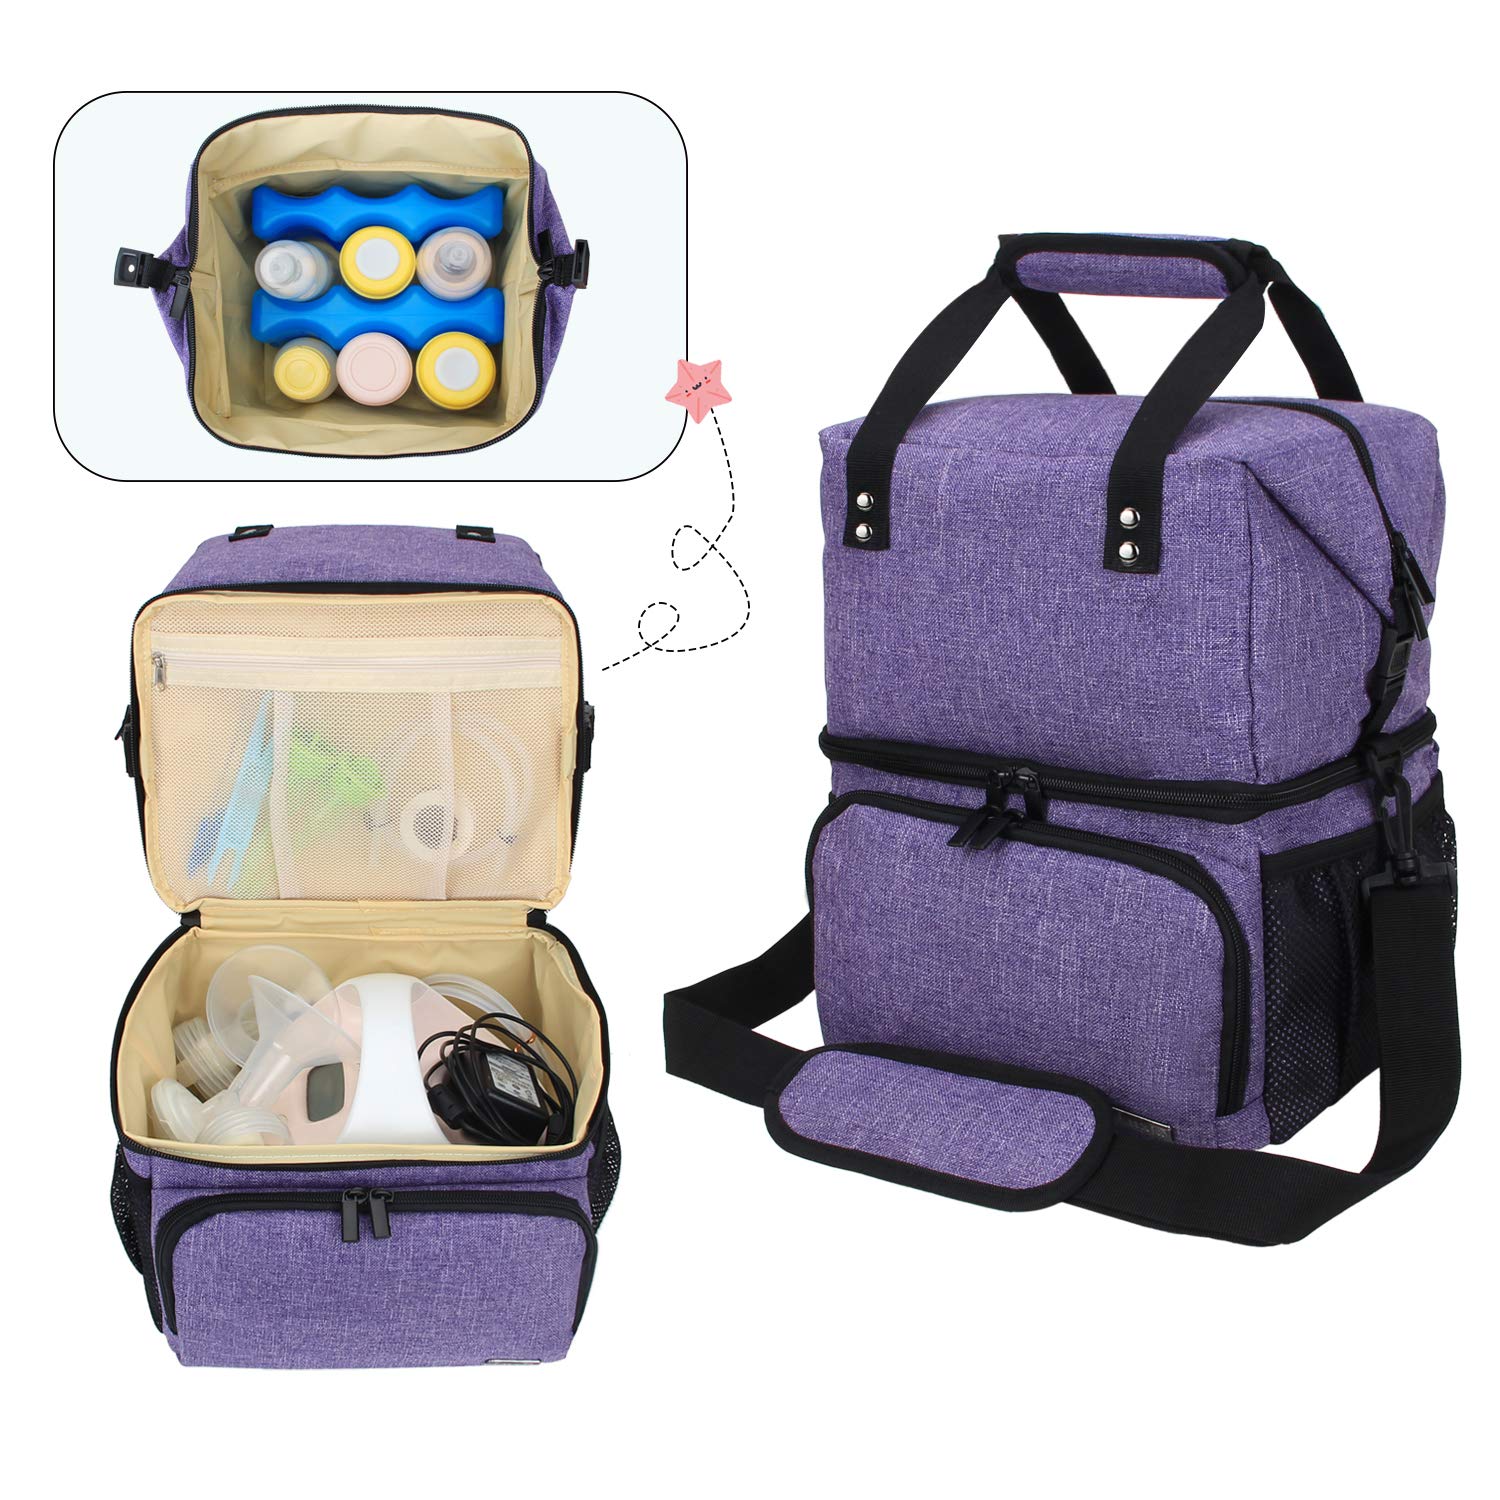 Luxja Breast Pump Bag with 2 Compartments for Breast Pump and Cooler Bag, Leakproof Pumping Bag for Working Mothers (Fits Most Major Breast Pump), Purple